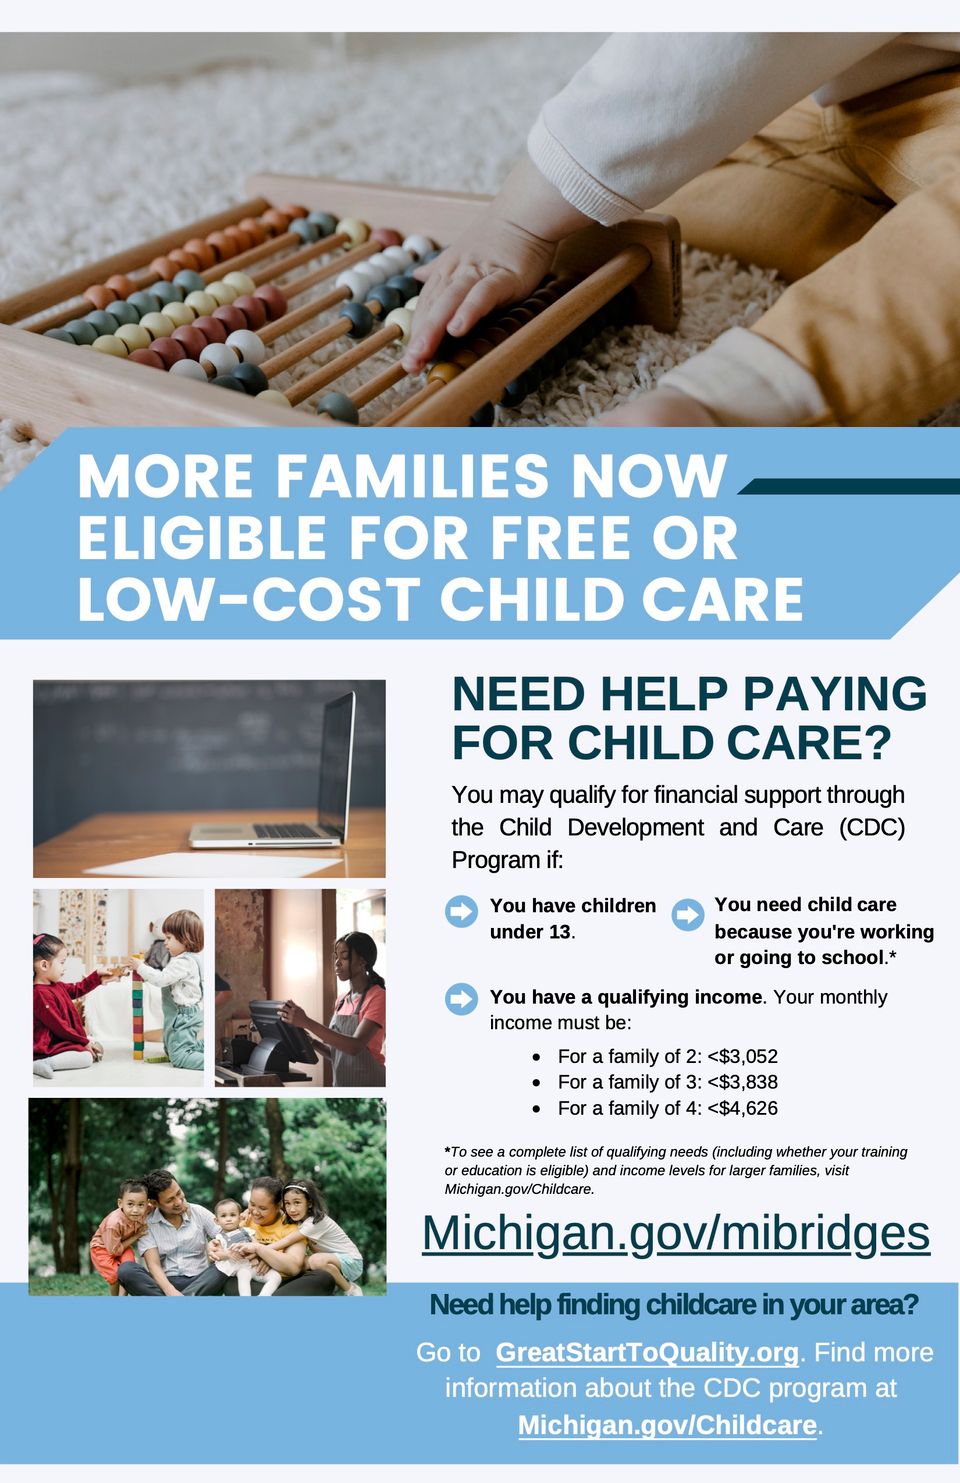 Child care handout for families